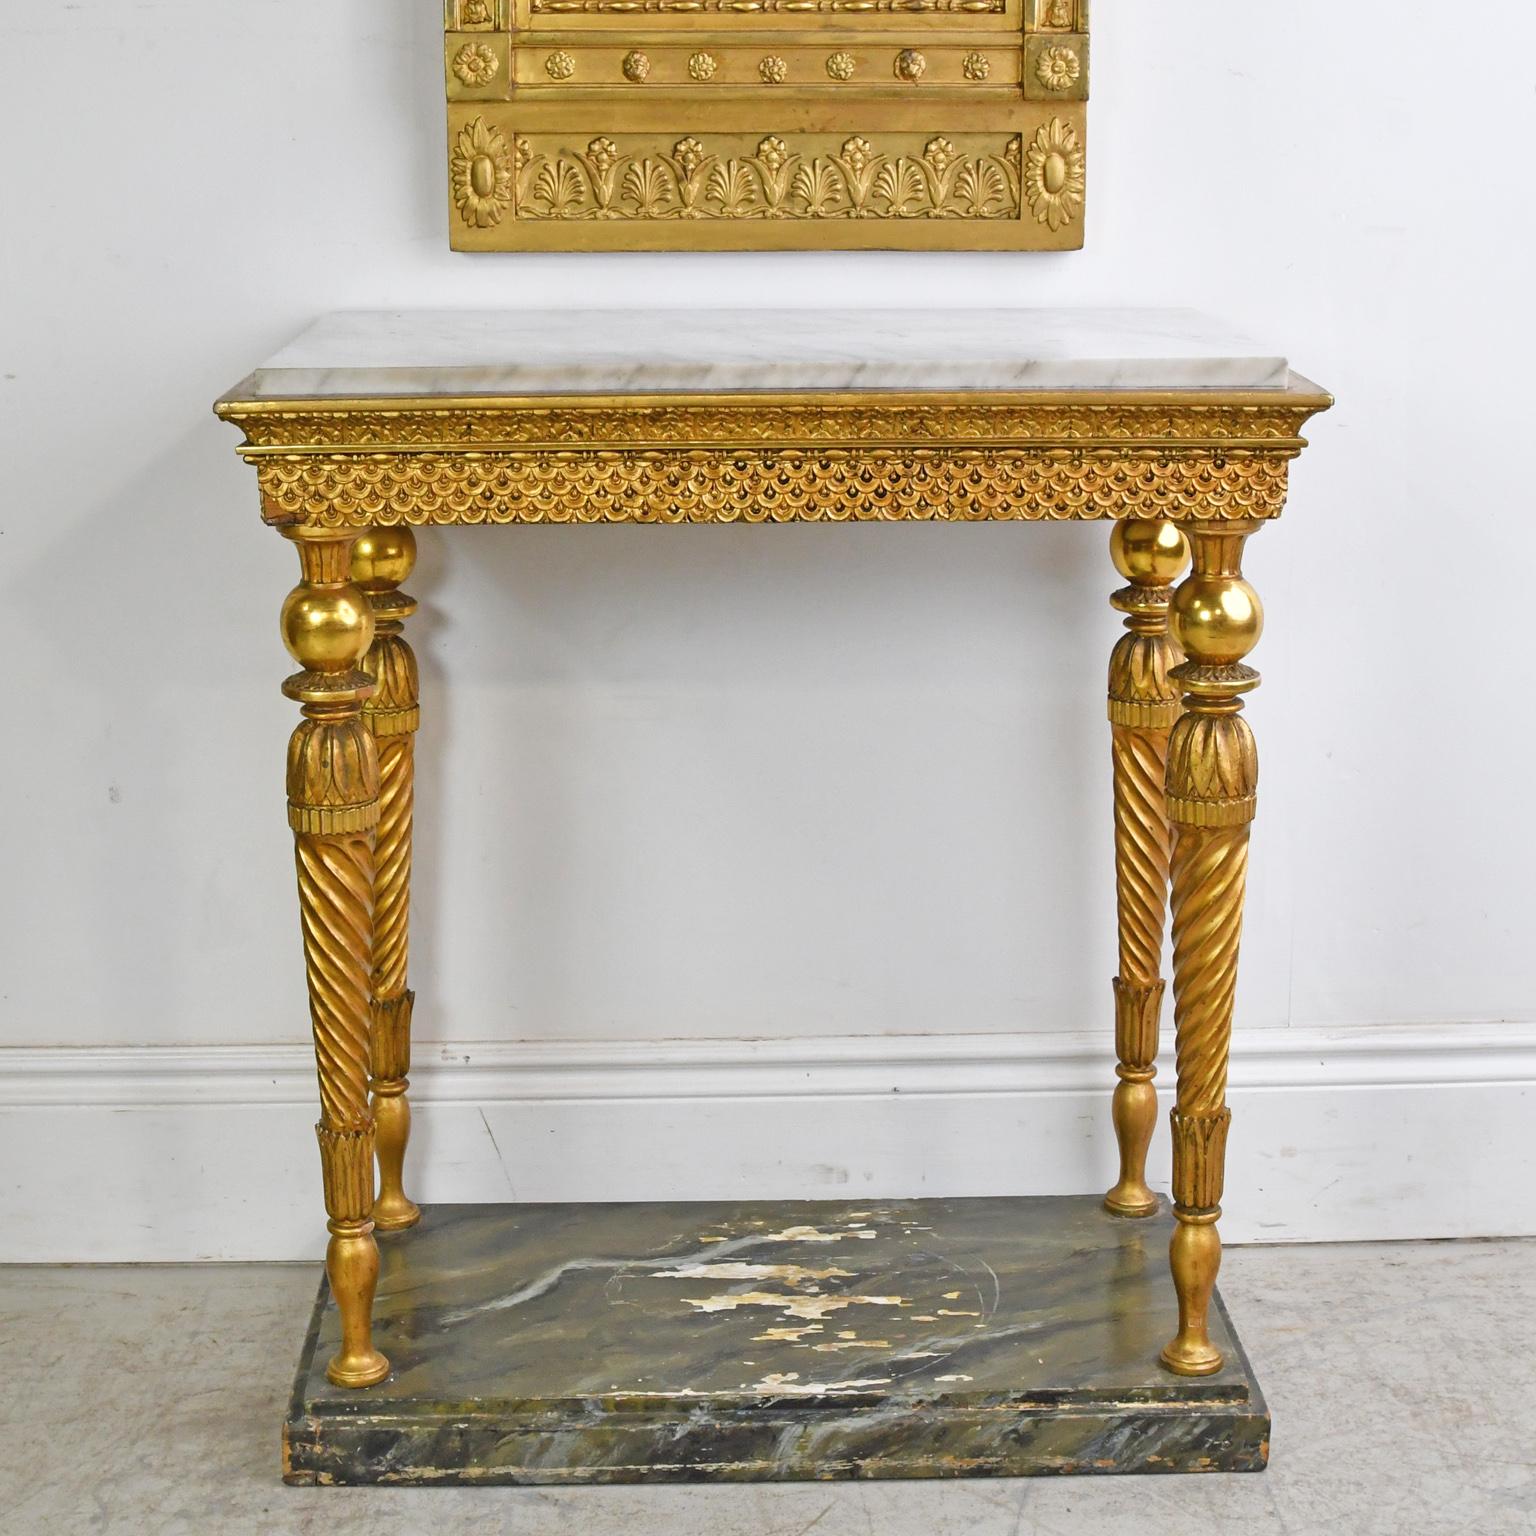 A very lovely console from the Swedish Gustavian period, a neoclassical style heavily influenced by the French Louis XVI style. In carved and gilded wood, the legs have carved water leafs and acanthus and are turned with a ball and discs that